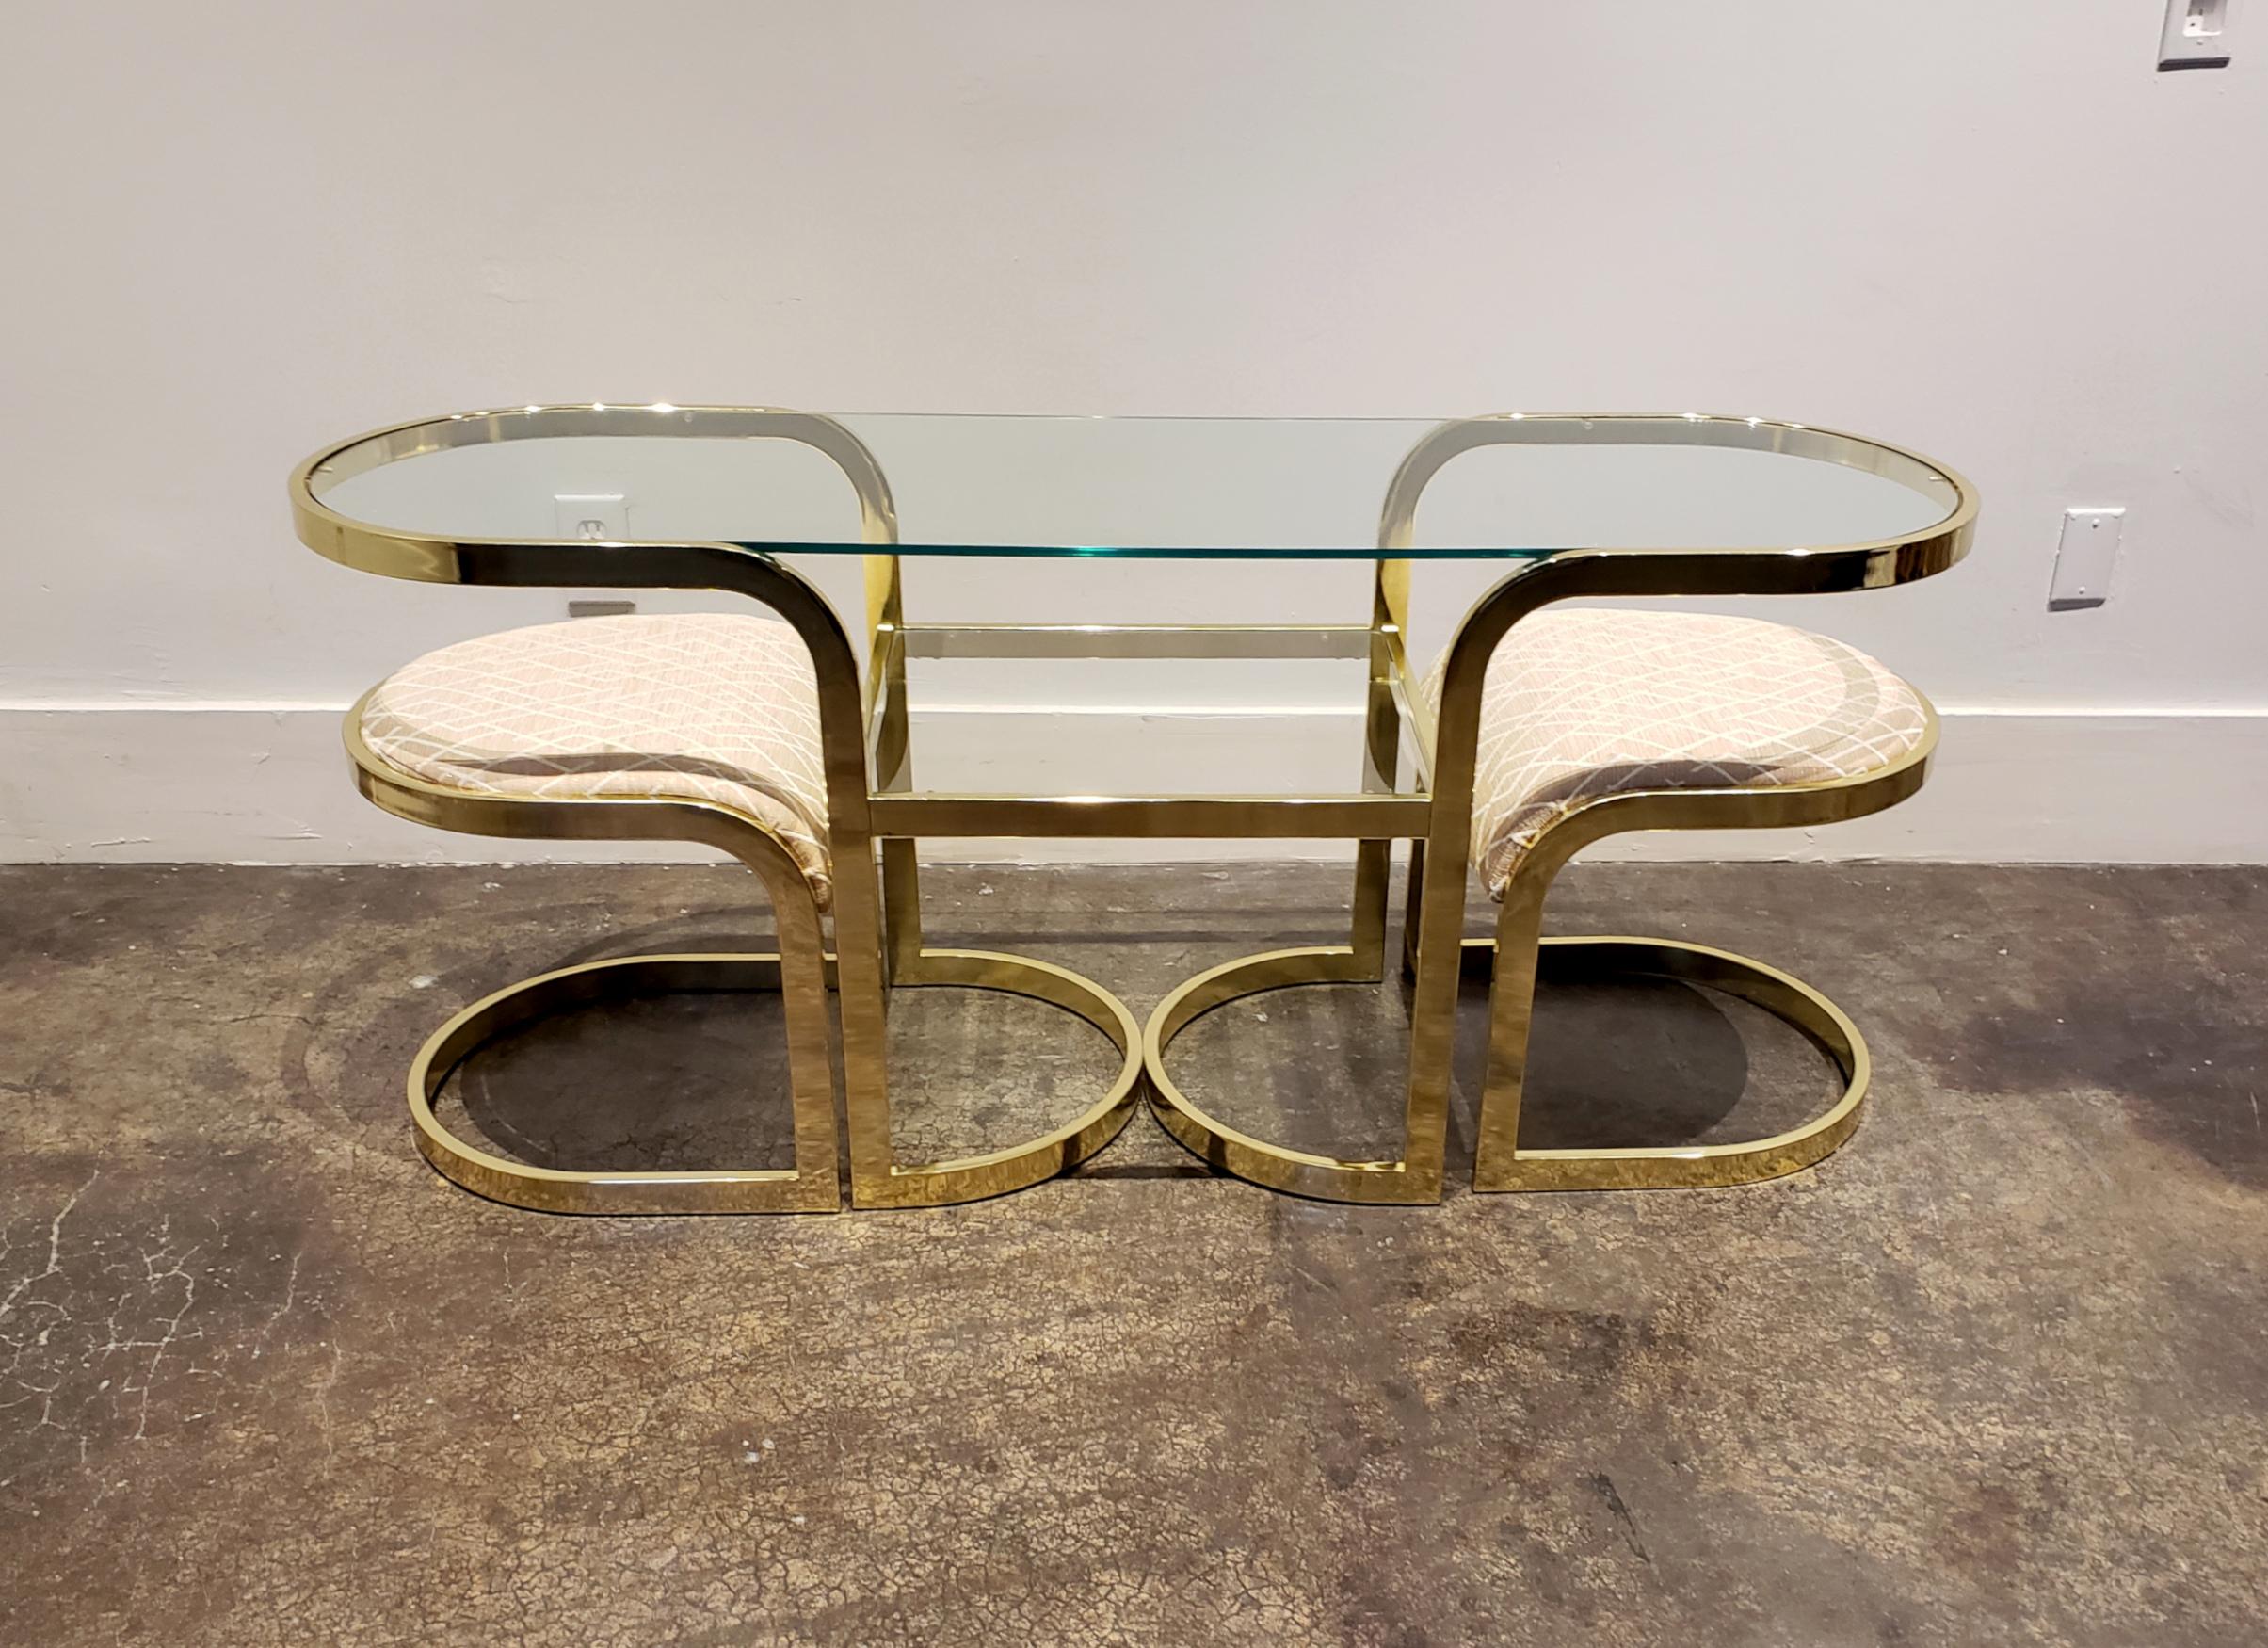 Mid-Century Modern Brass Console Cafe Table with Pink Chairs by DIA Design Institute of America